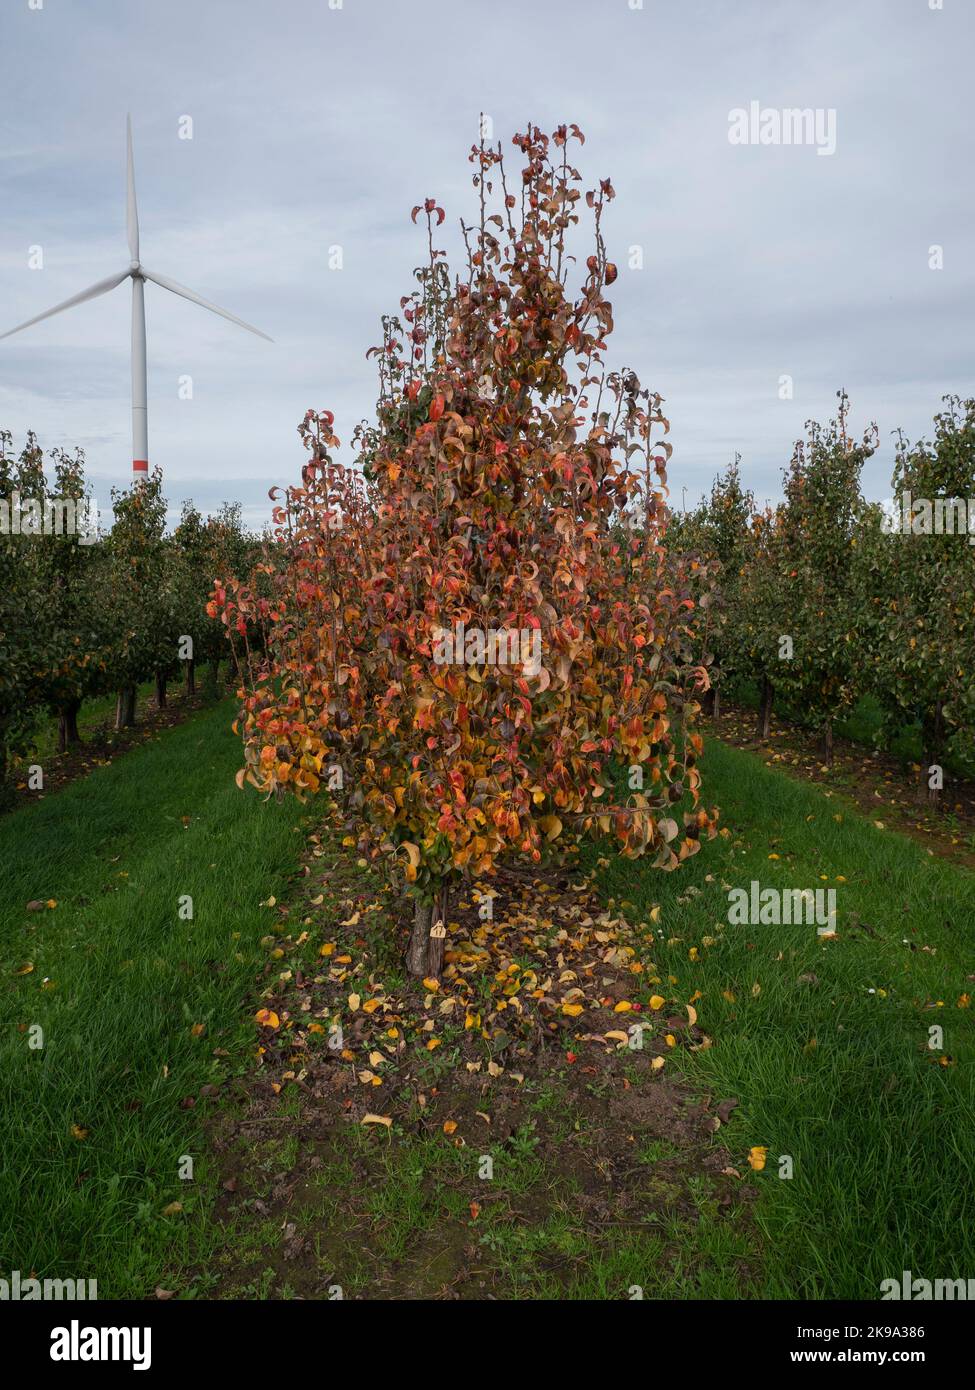 Pear tree in an orchard with autumn leaves and a wind turbine in the background Stock Photo